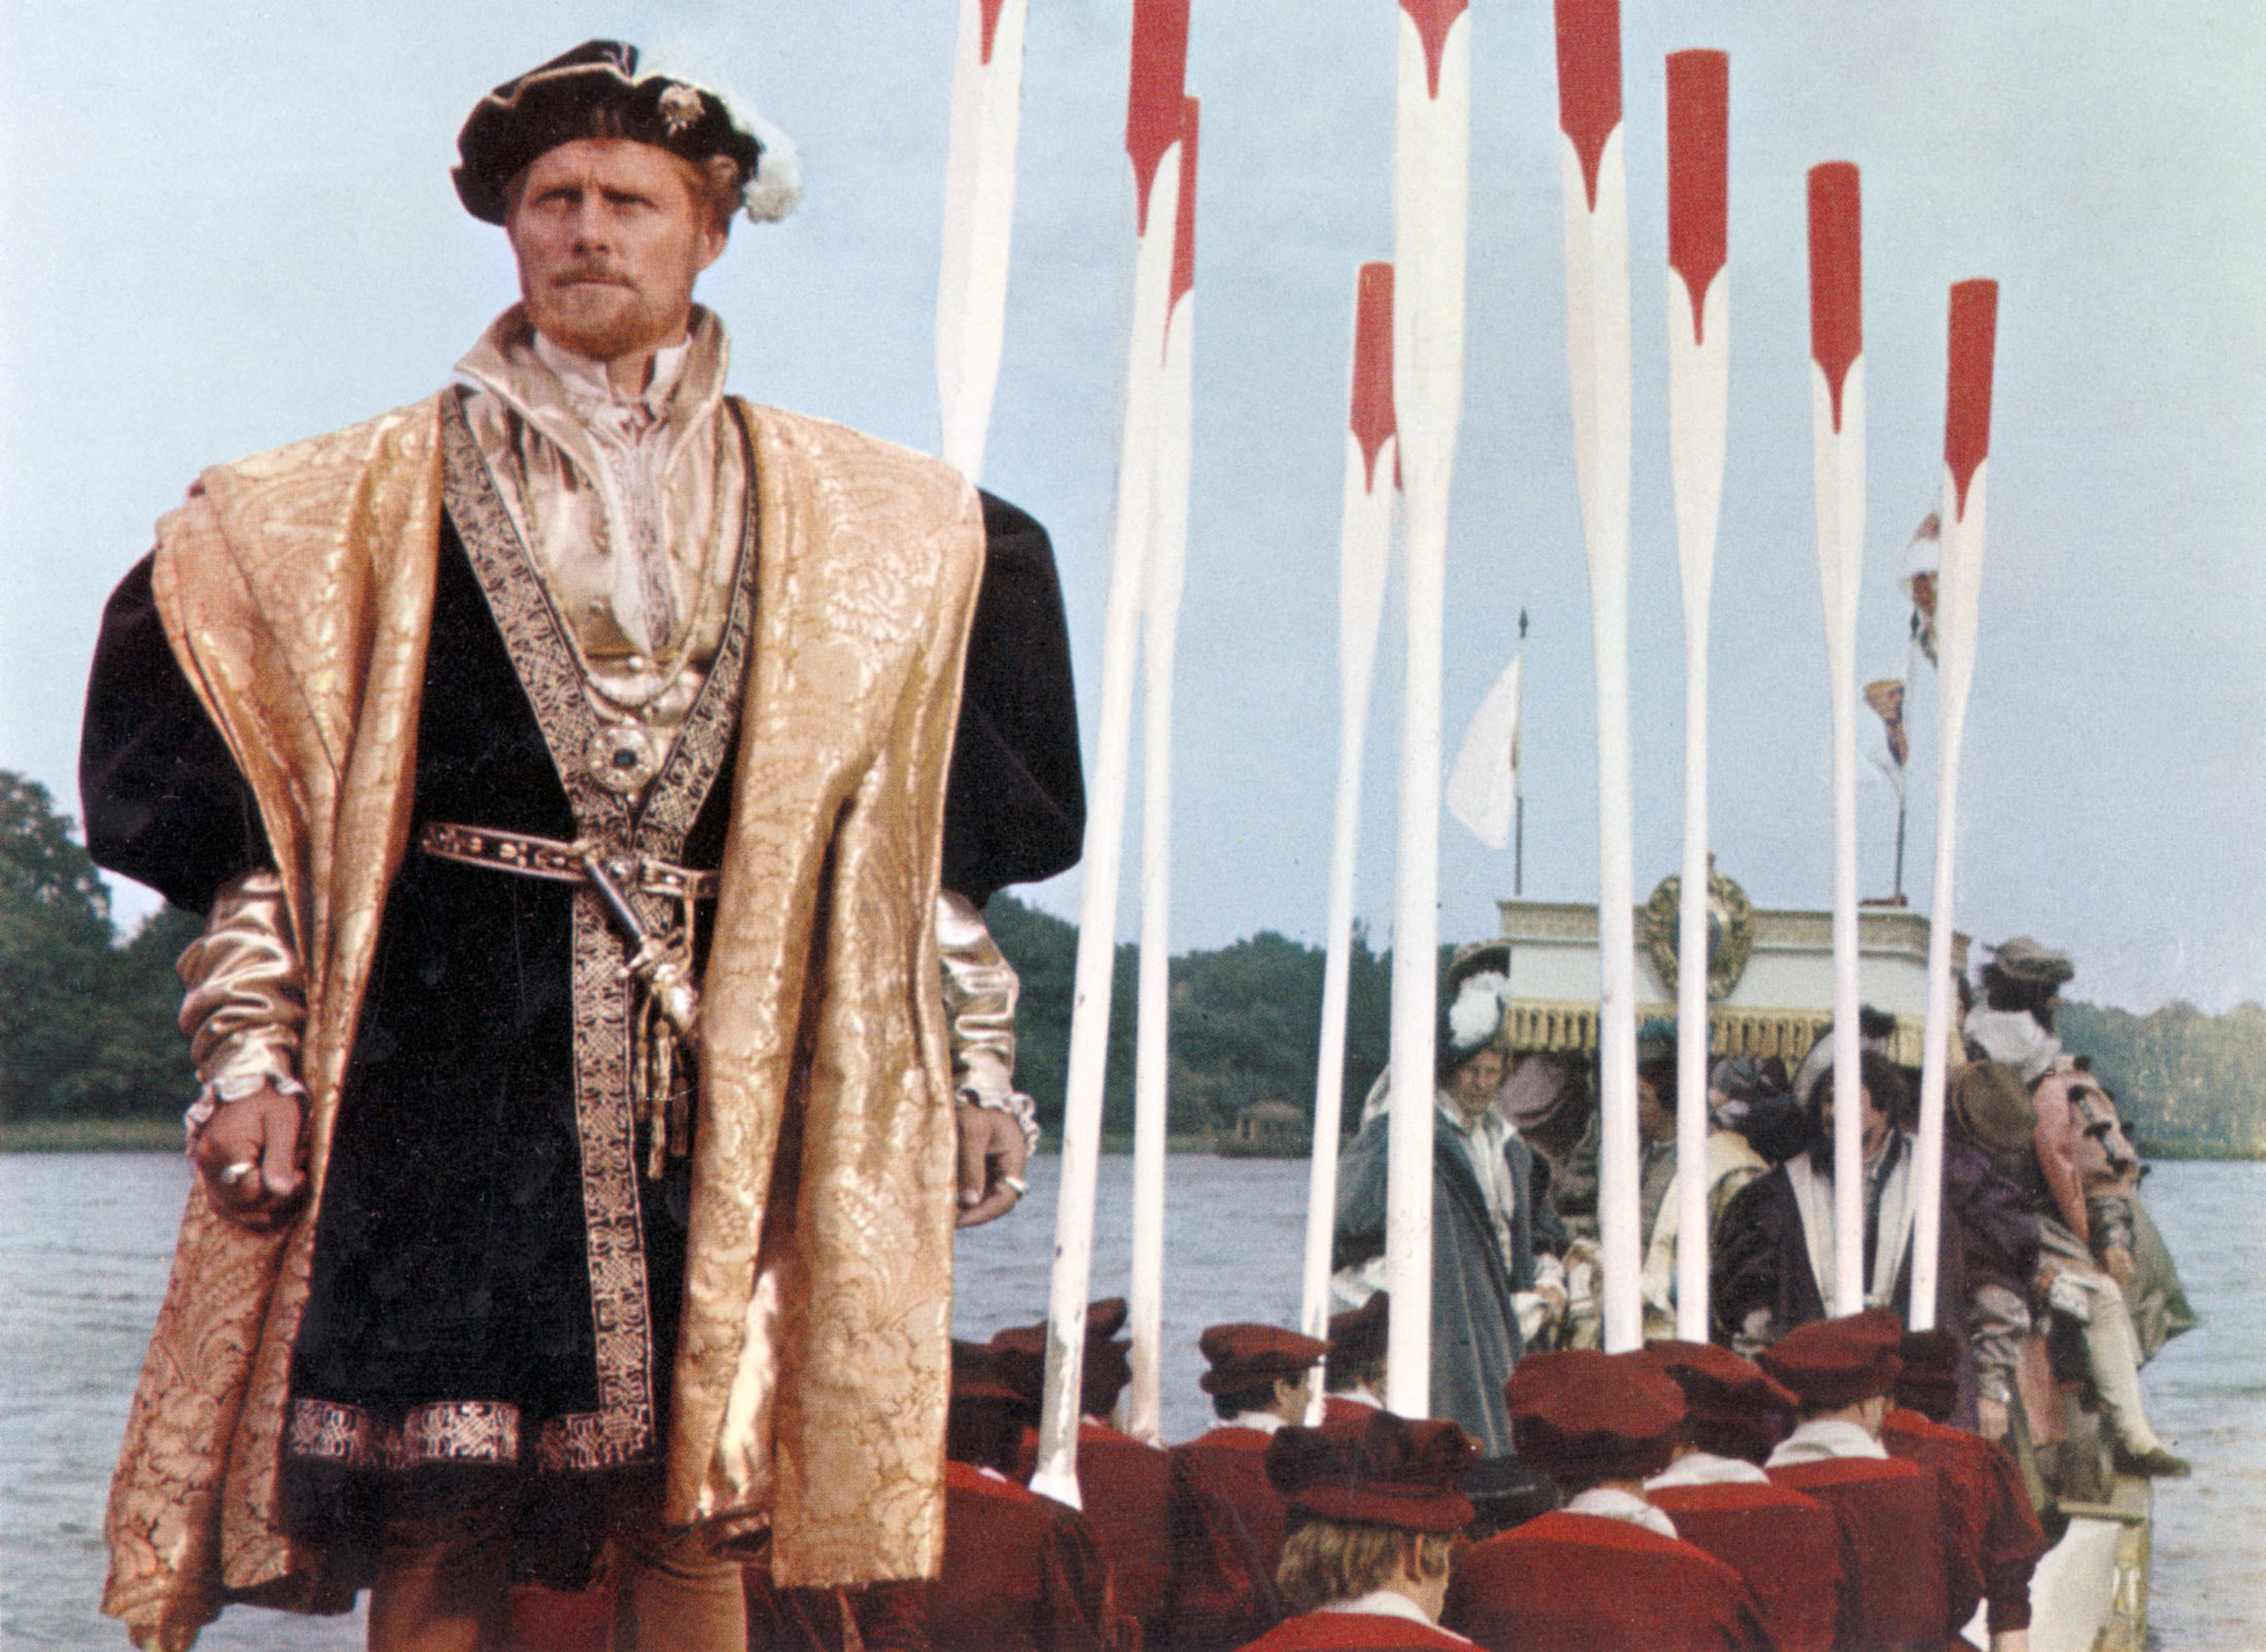 <p>This Best Picture winner is more about Thomas More, but you can’t tell More’s story without Henry VIII. More is the man who refused to sign off on Henry VIII’s divorce, which did not sit well with the monarch. Robert Shaw plays Henry, but Paul Scofield won Best Actor for playing Moore.</p><p>You may also like: <a href='https://www.yardbarker.com/entertainment/articles/celebrities_with_the_most_difficult_names_to_pronounce_012924/s1__28843502'>Celebrities with the most difficult names to pronounce</a></p>